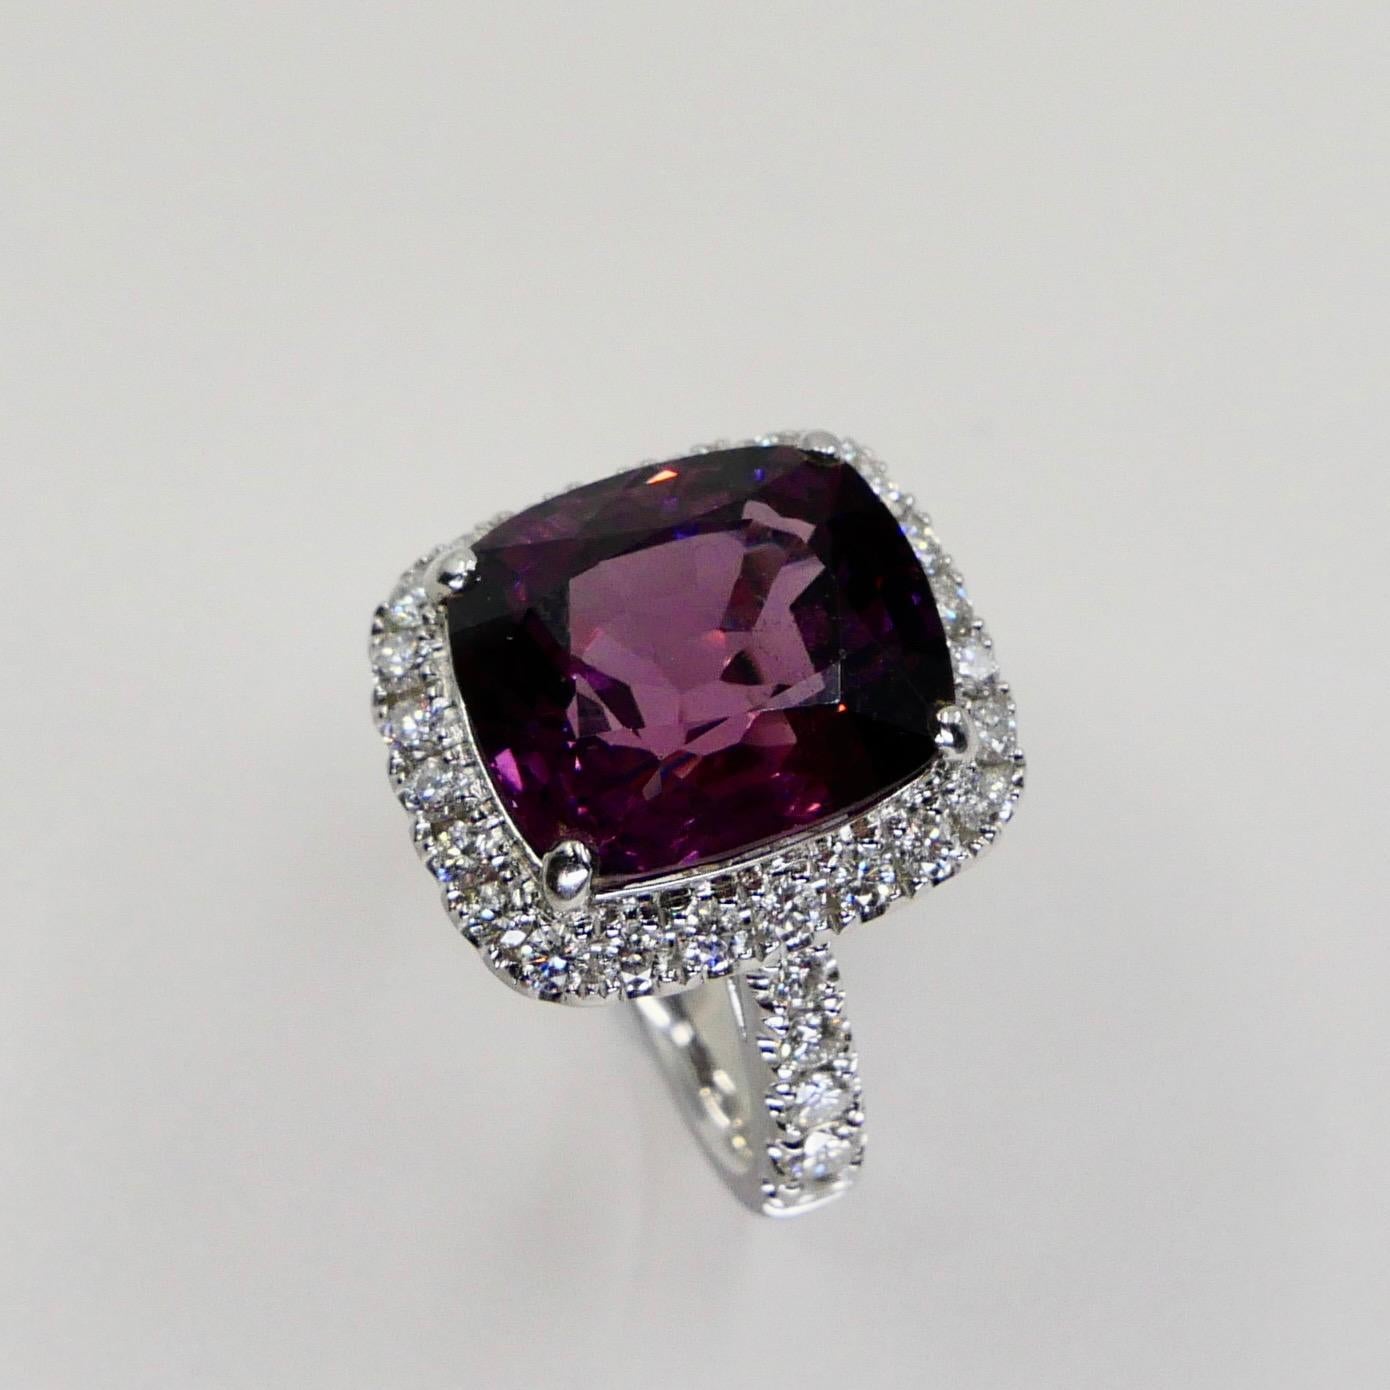 Cushion Cut Certified Natural 9.18 Carat Vivid Purple No Heat Spinel & Diamond Cocktail Ring For Sale